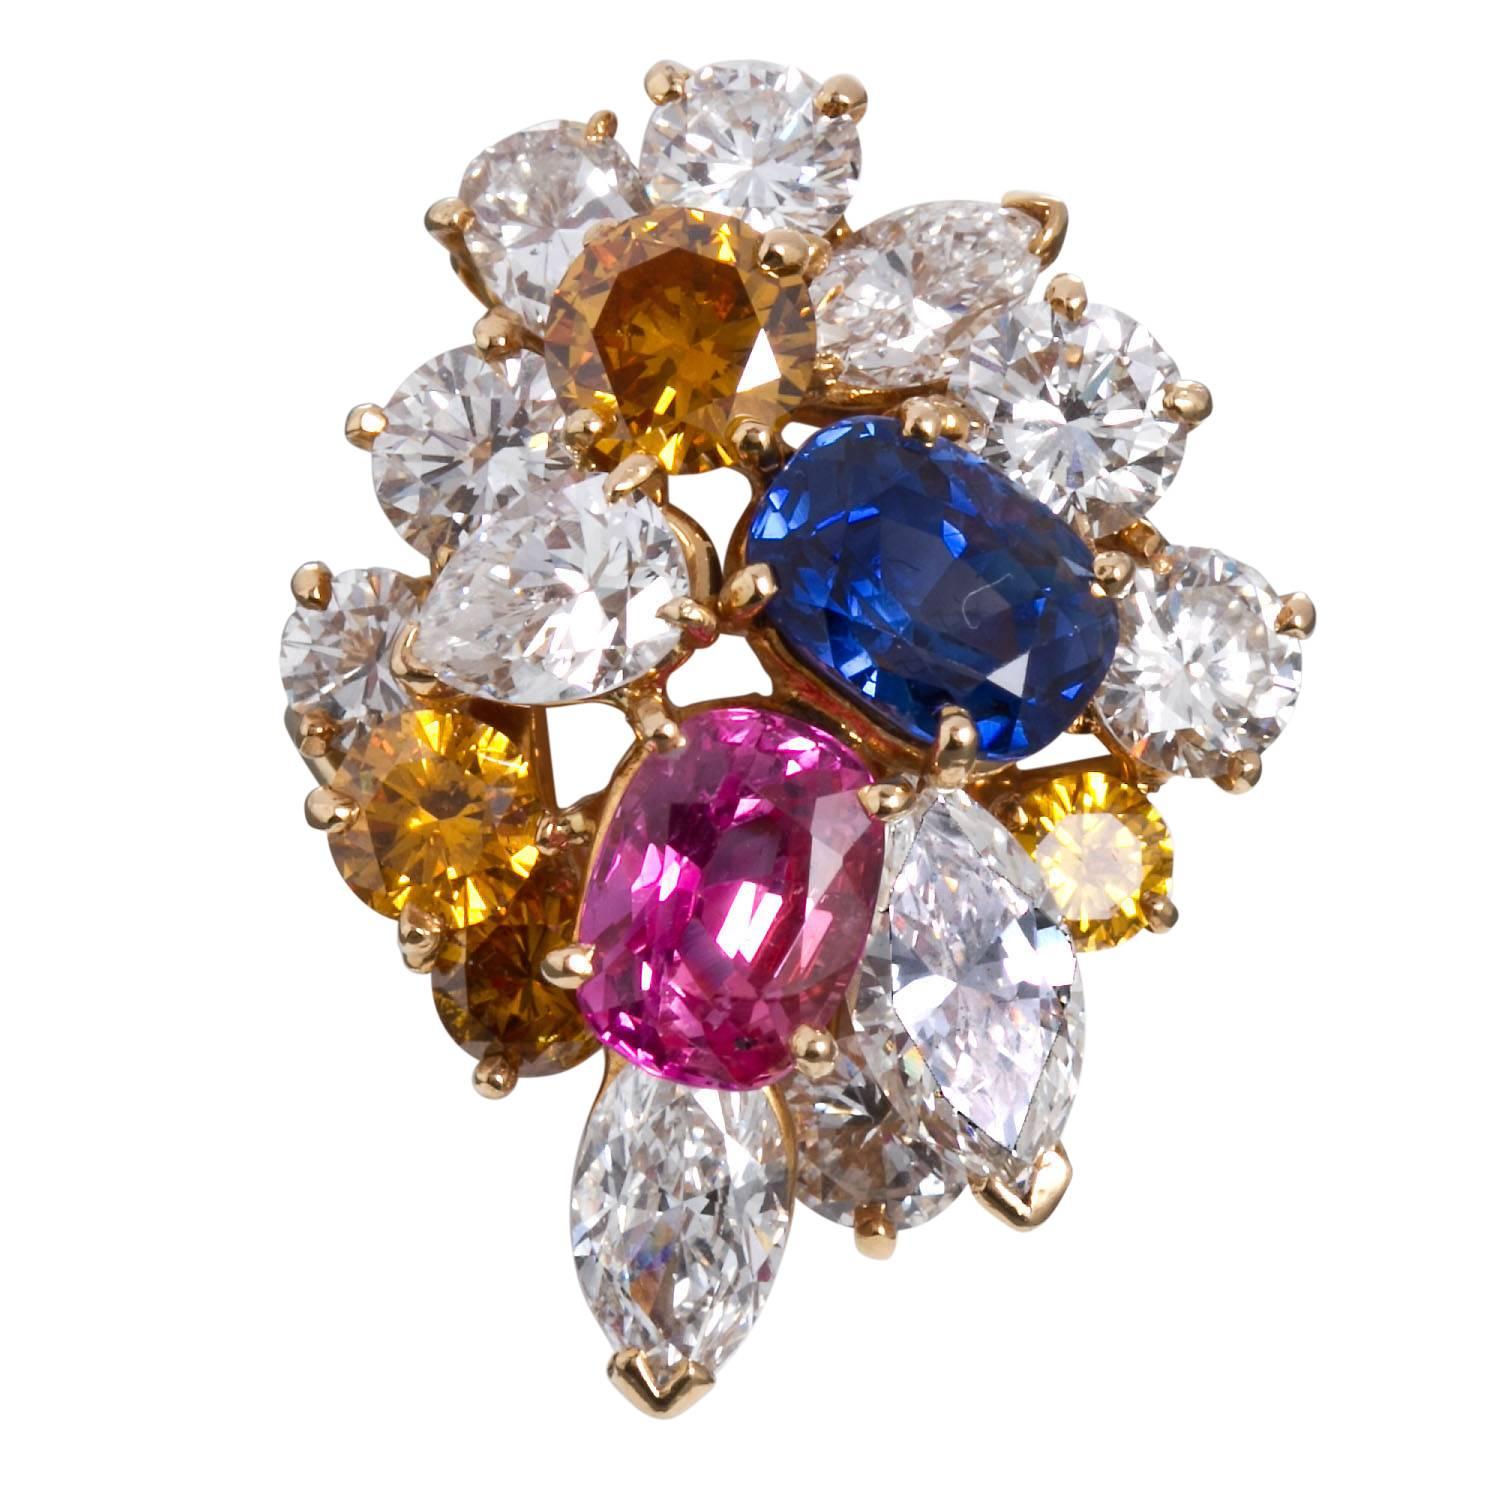 A superb diamond and sapphire ring in 18 karat yellow gold by Oscar Heyman Circa 1968.  Contains one oval brilliant blue sapphire 1.80 ct; one oval brilliant pink sapphire 1.58 ct; Five pear shape and marquise shape diamonds 2.40 ctw; six round